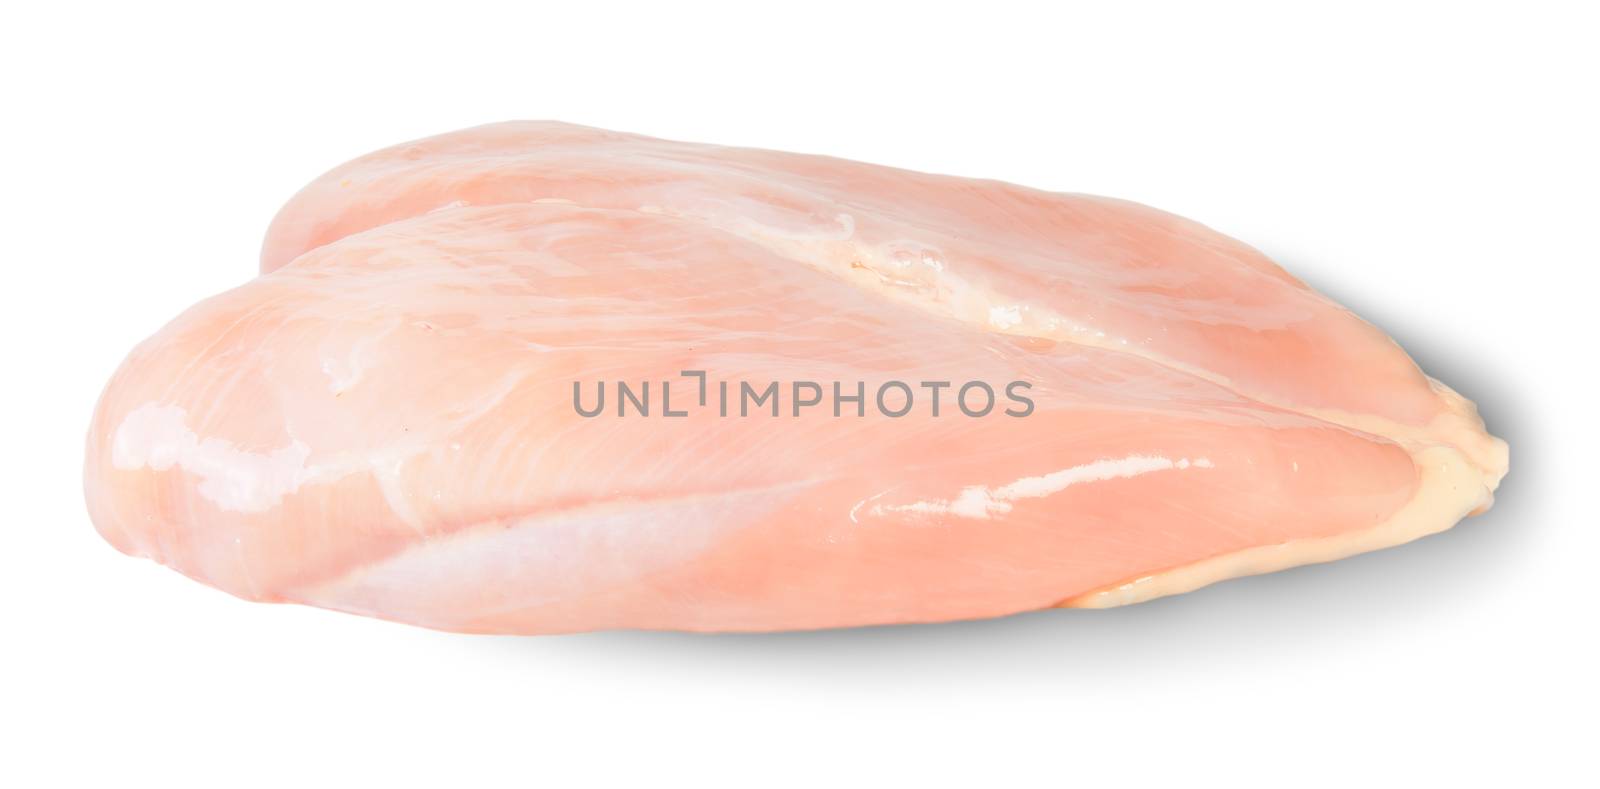 Raw Chicken Breast Isolated On White Background